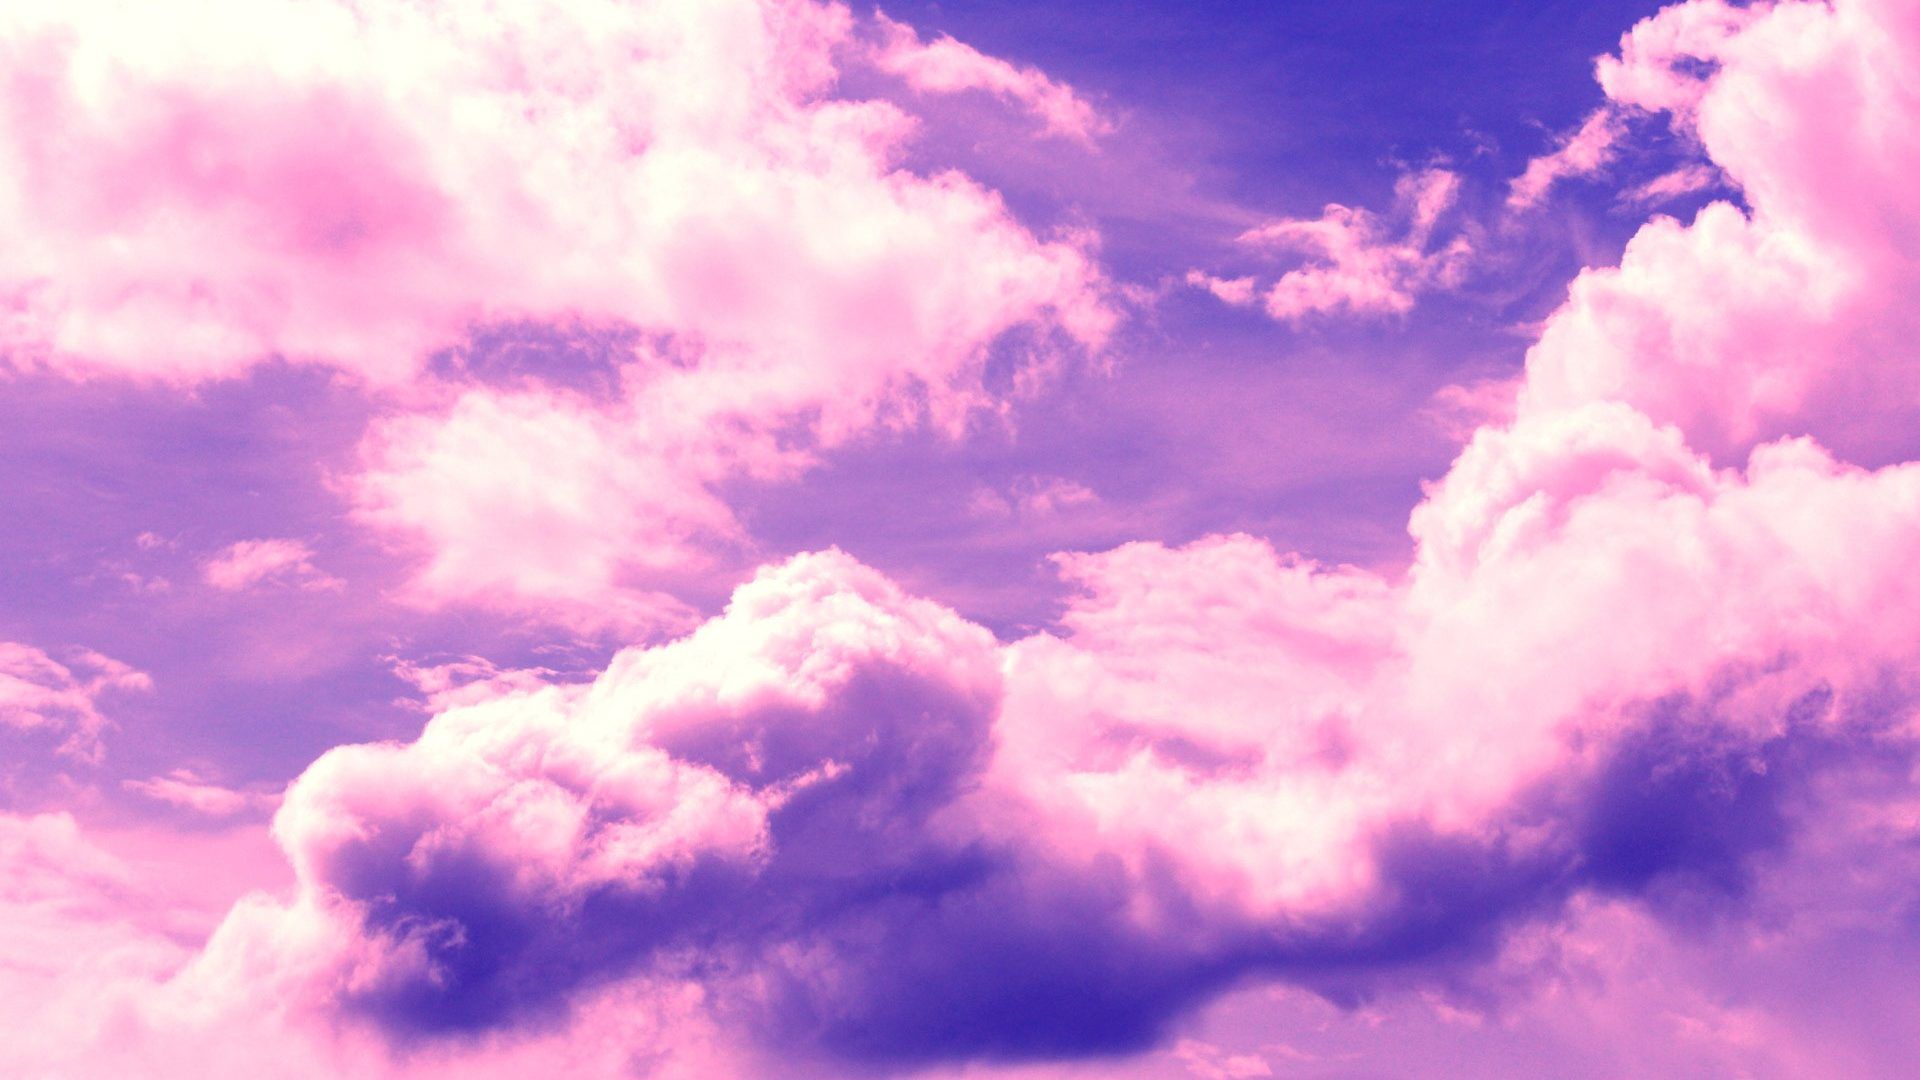 Aesthetic Sky Wallpapers posted by Sarah Tremblay